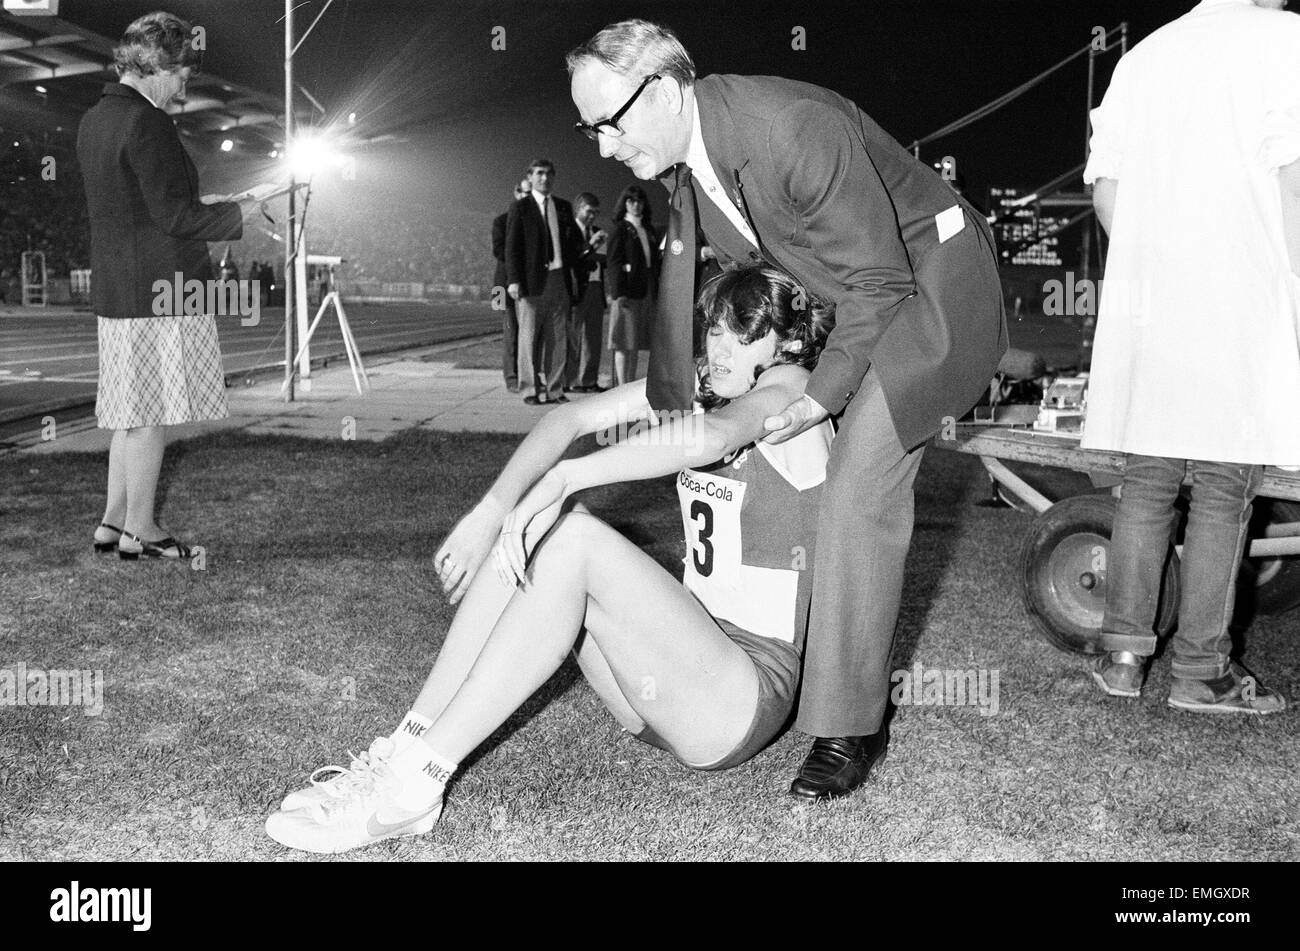 British athlete Kathy Smallwood exhausted after winning the Women's 400 metres race at the Coca Cola Athletics meeting at Crystal Palace. 17th September 1982. Stock Photo